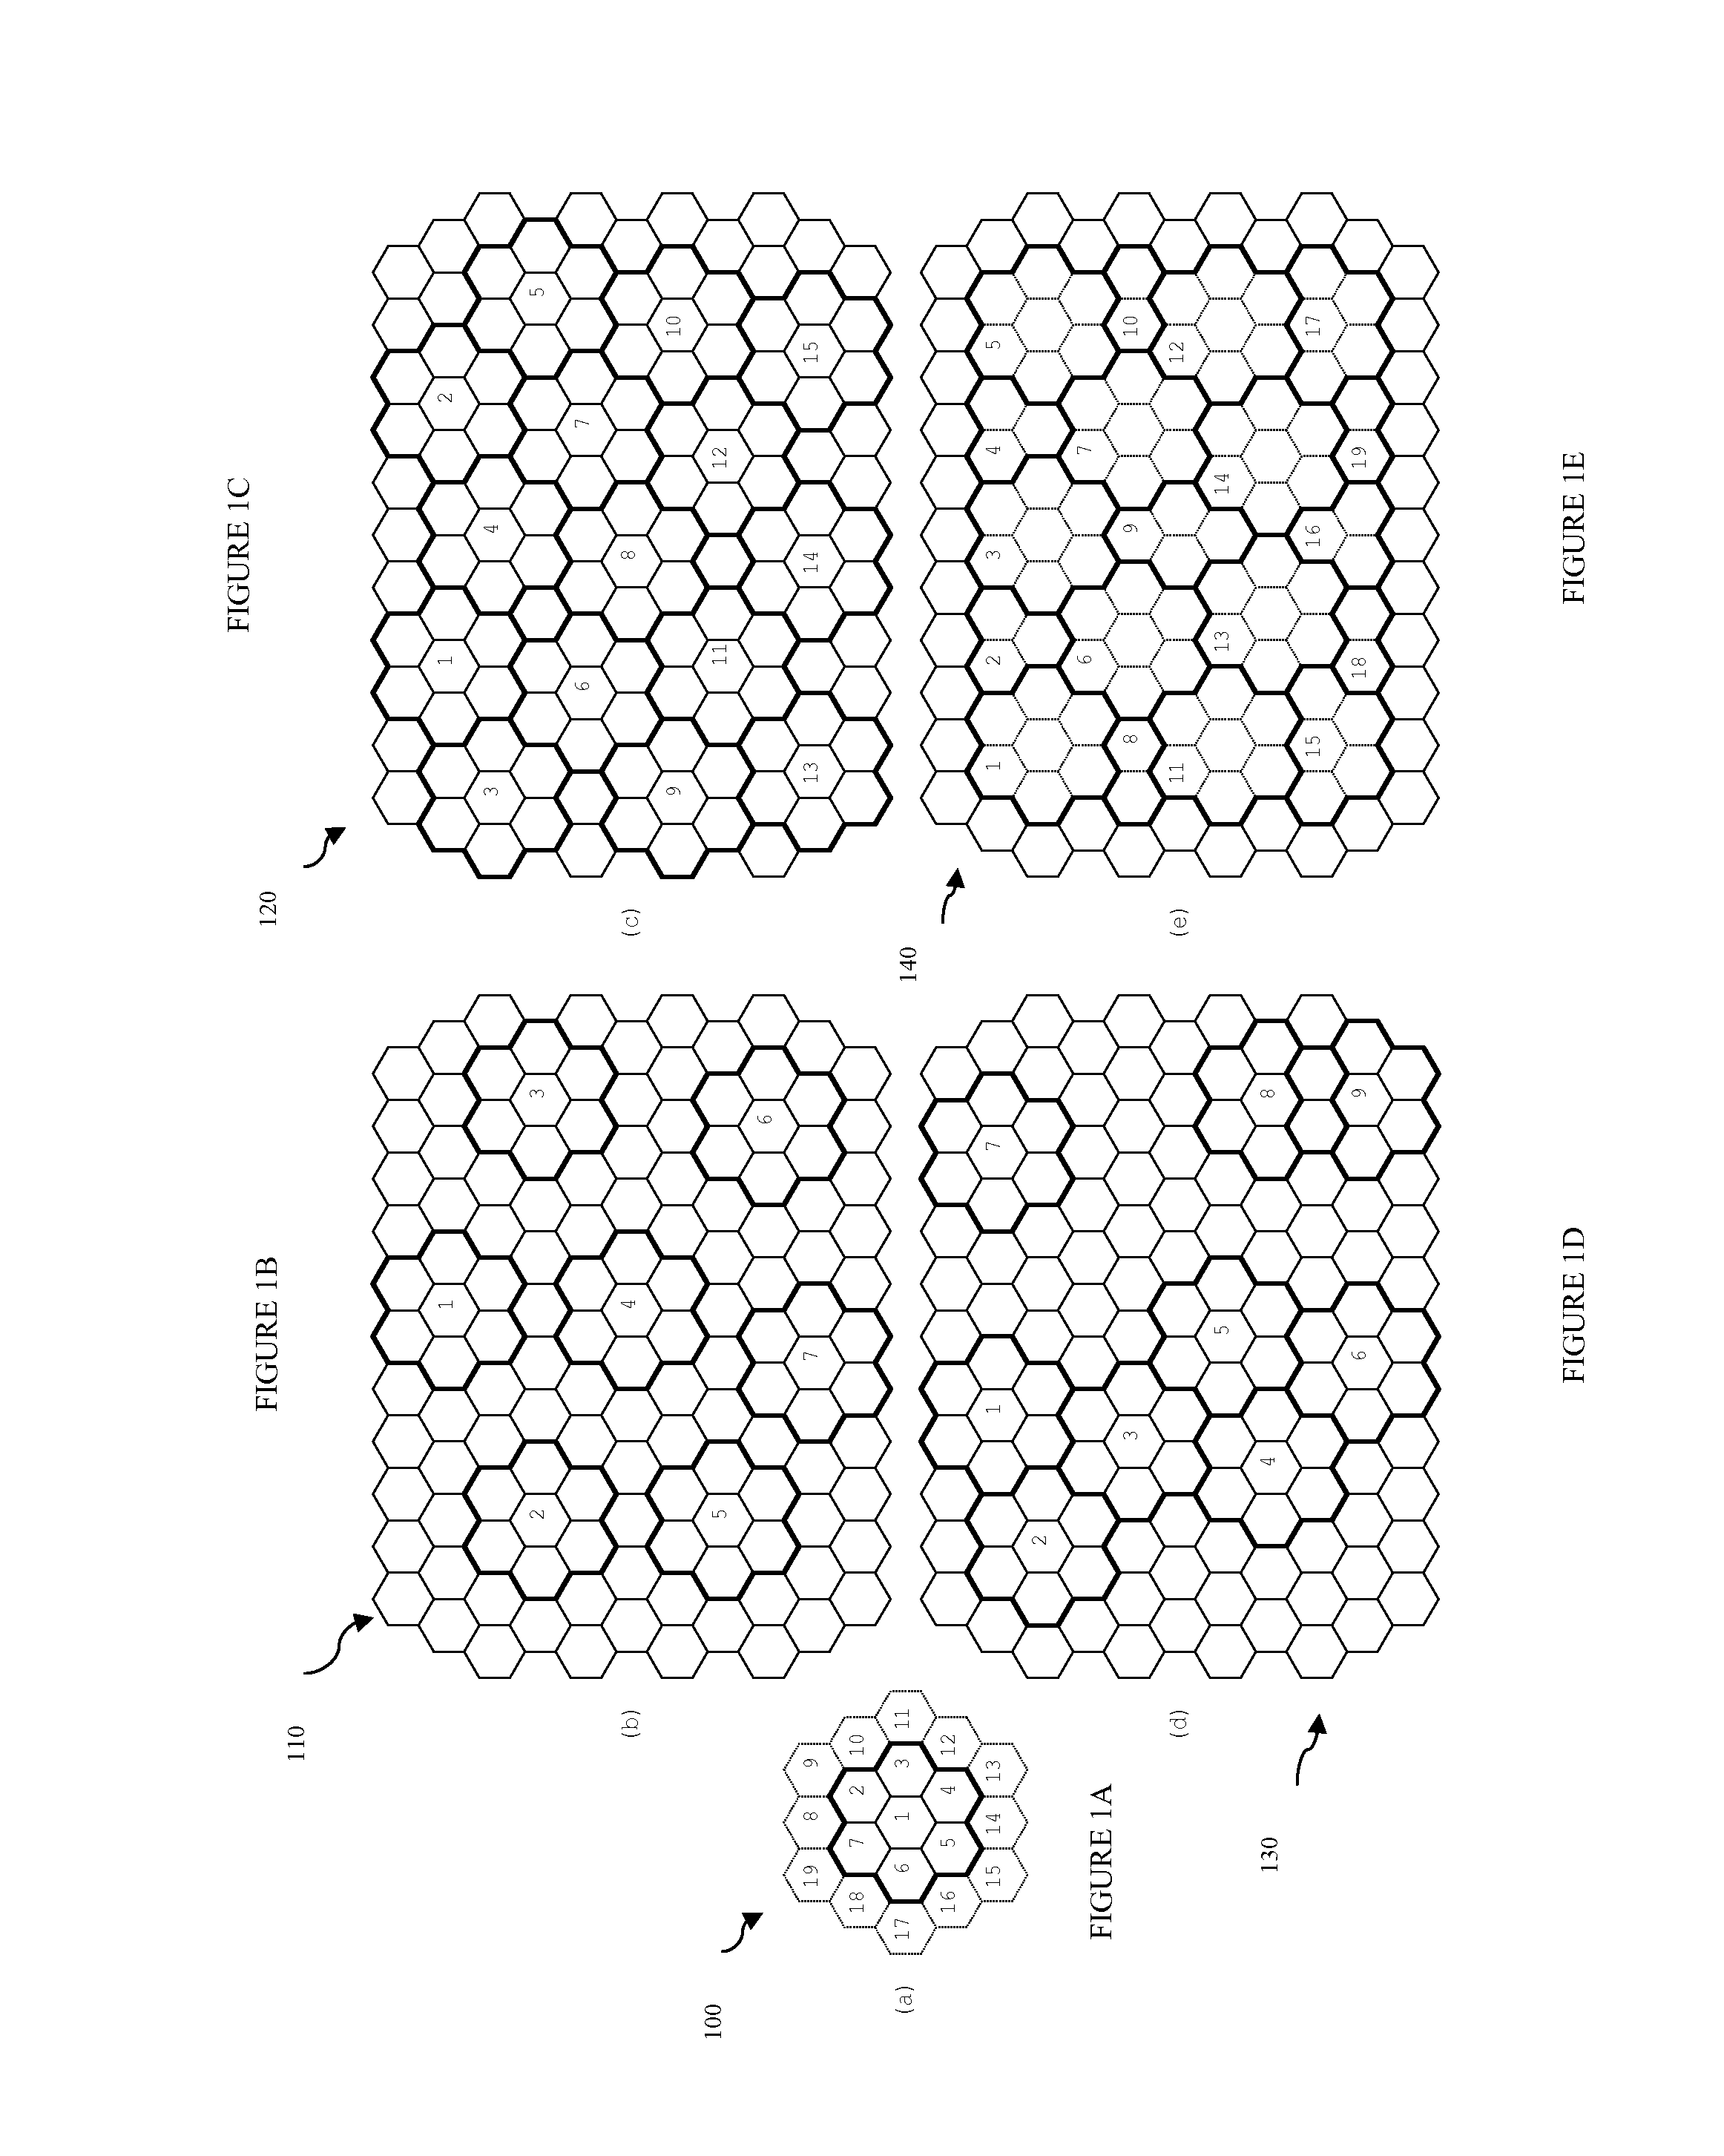 Method and system for nuclear imaging using multi-zone detector architecture